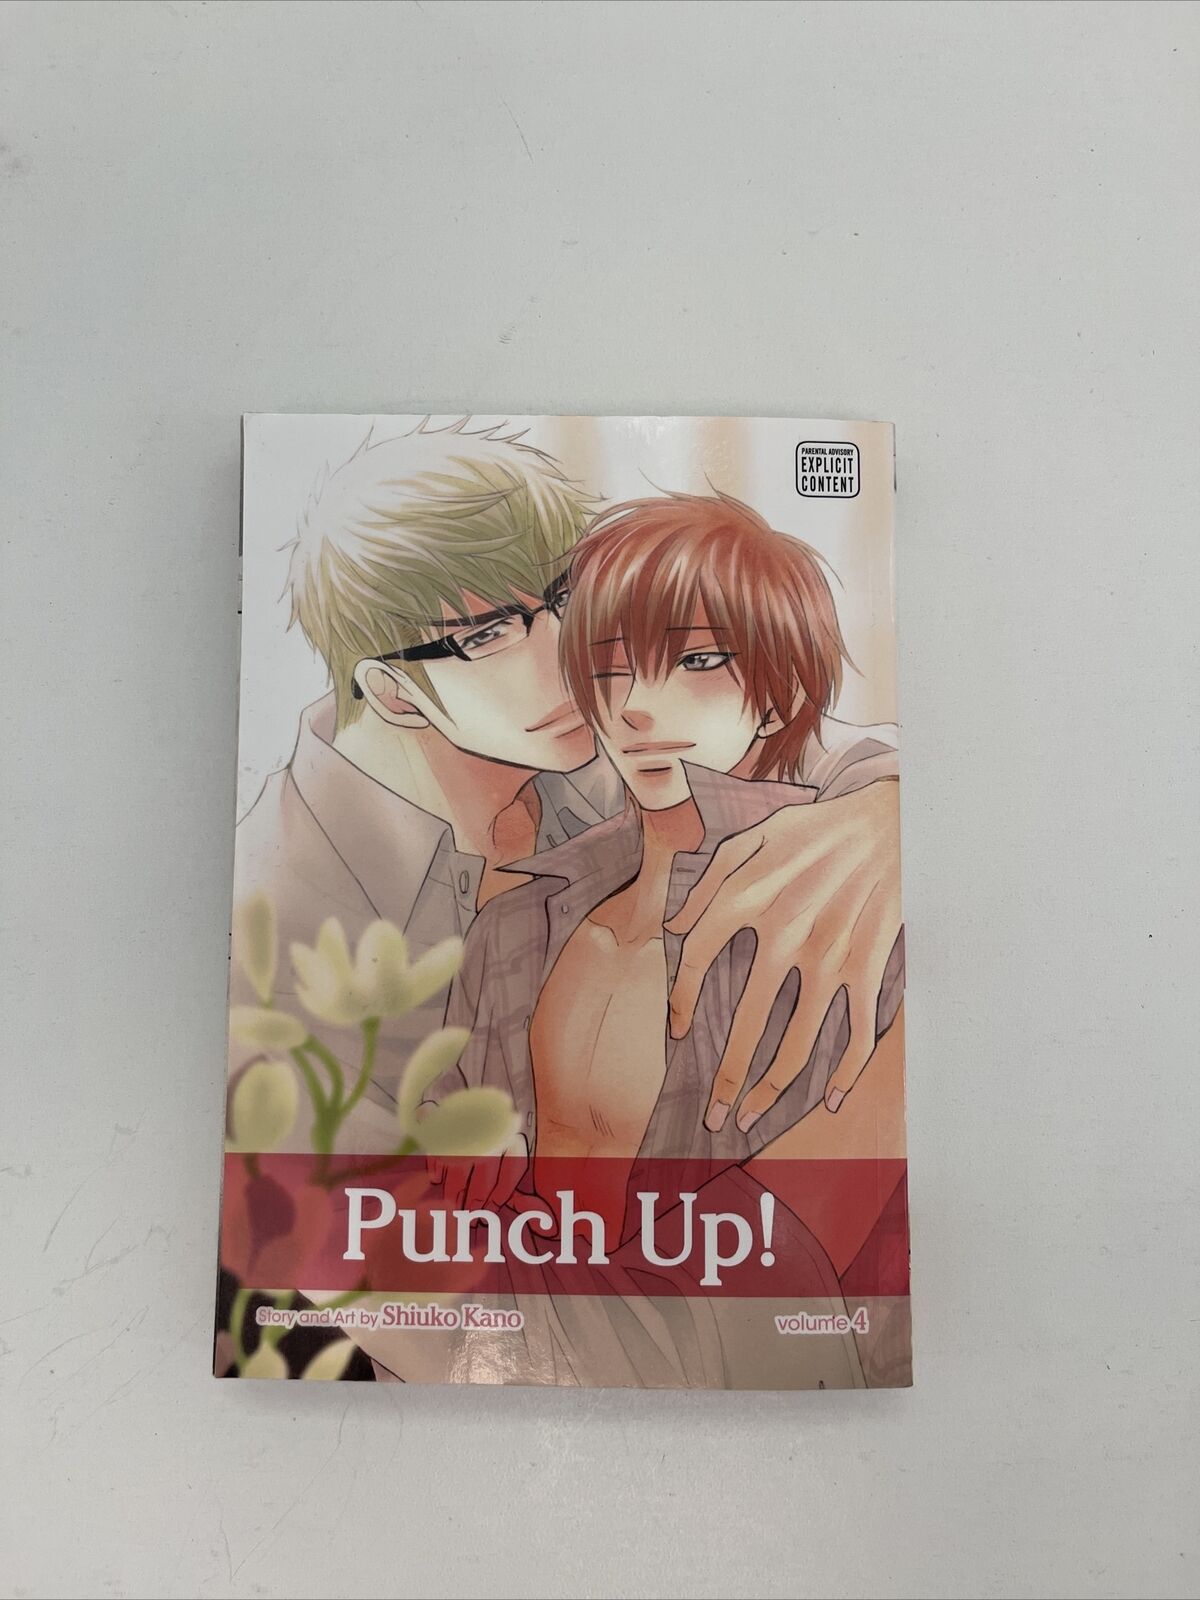 Punch Up vol 4 by Shiuko Kano / NEW Yaoi manga from Sublime